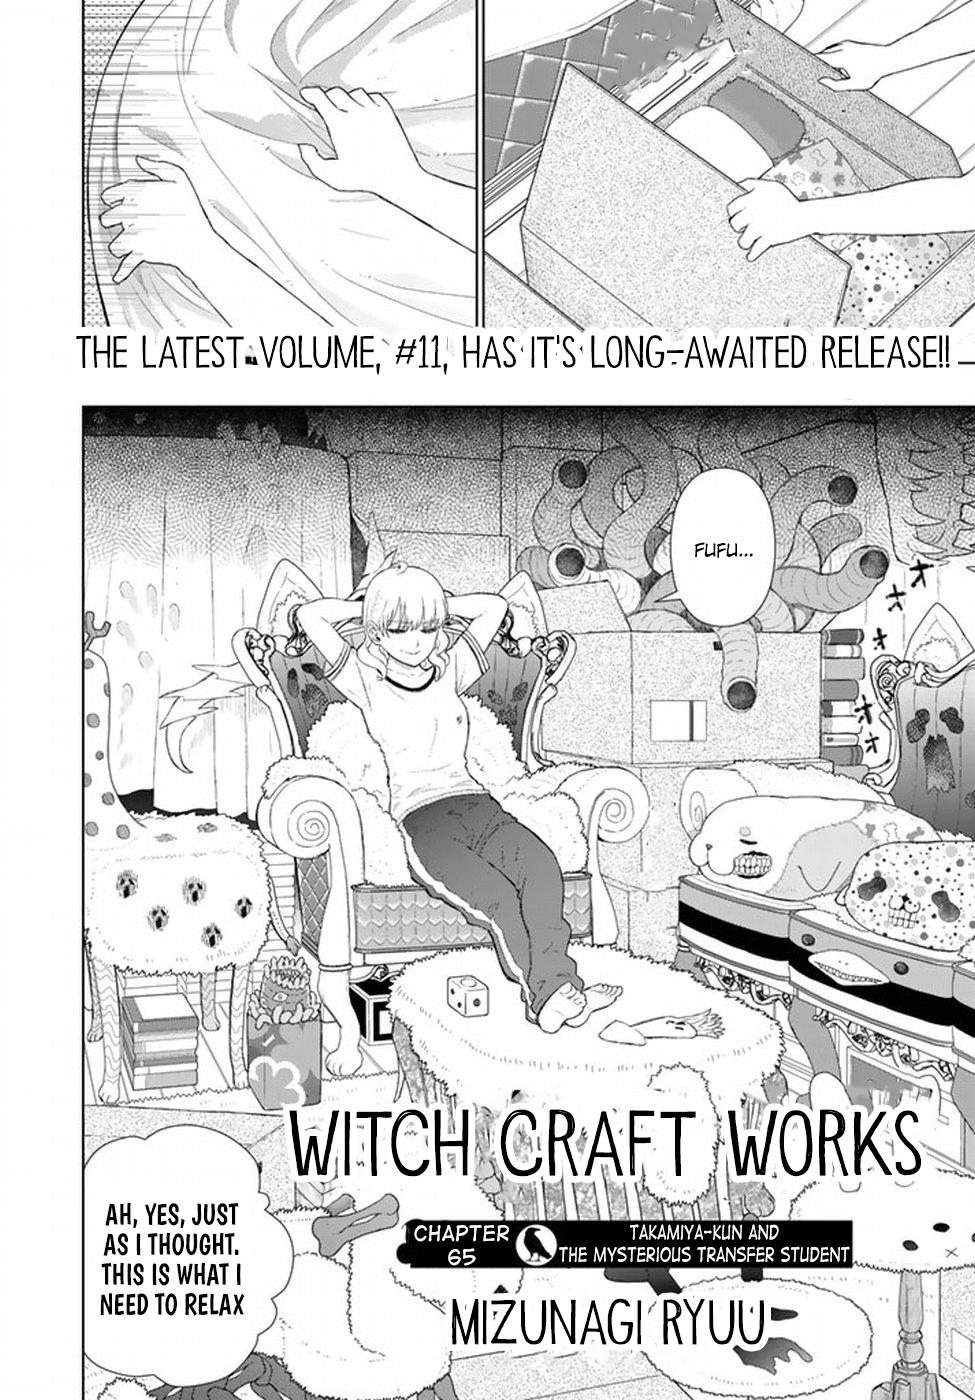 Witchcraft Works Chapter 65 #2